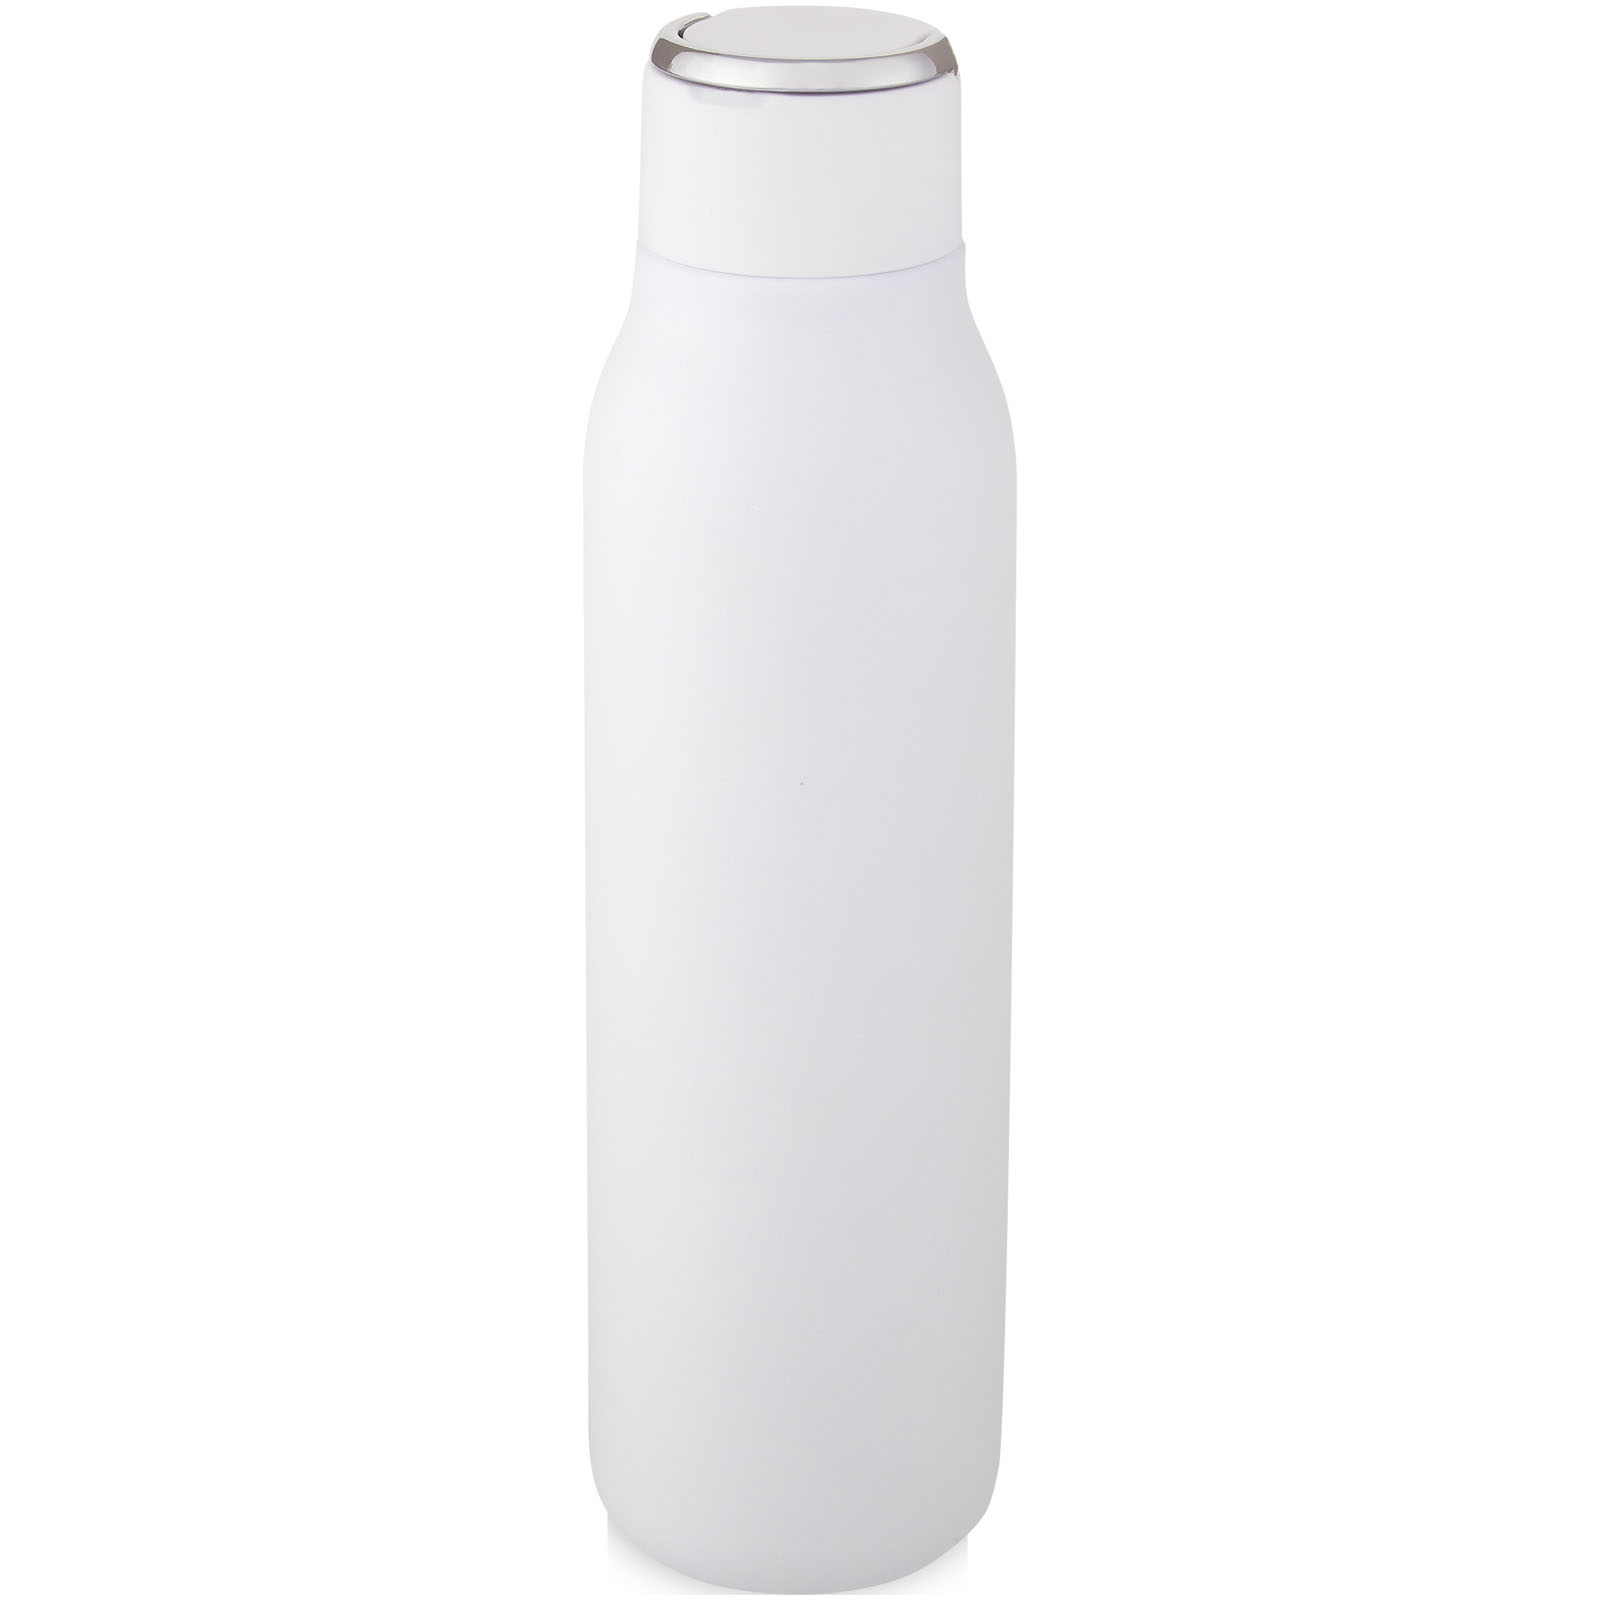 Advertising Insulated bottles - Marka 600 ml copper vacuum insulated bottle with metal loop - 4